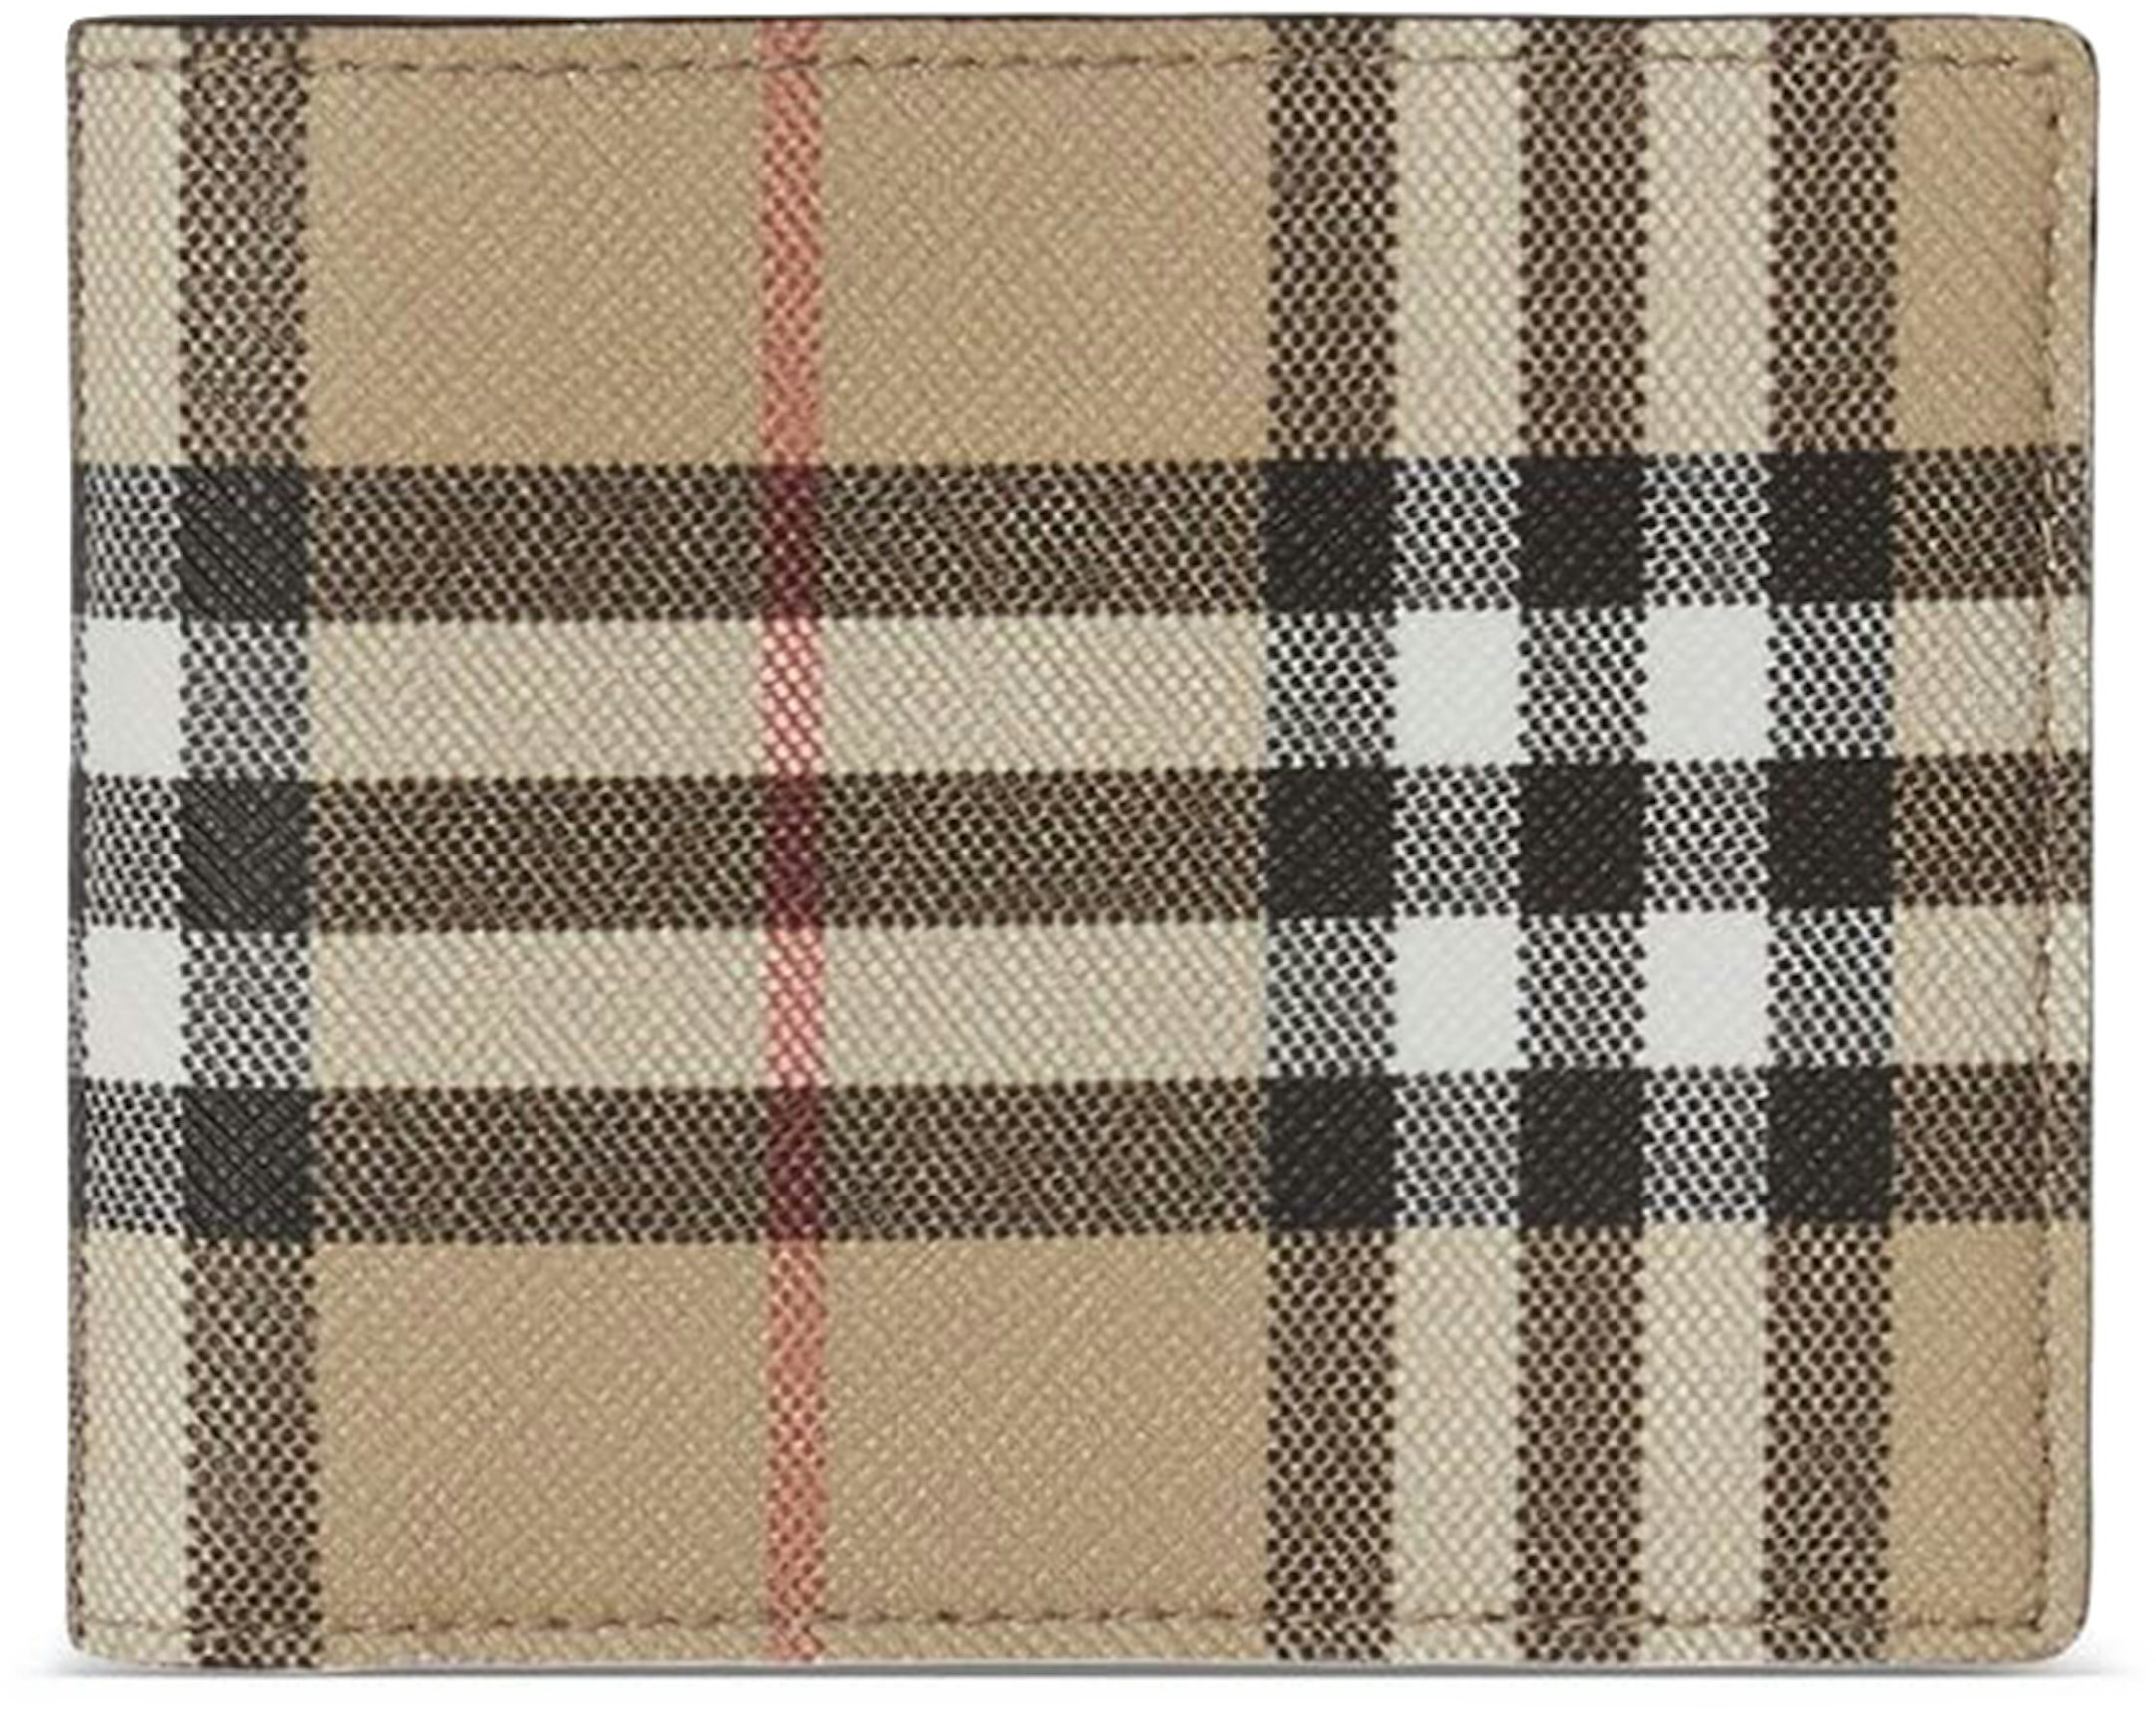 Burberry Check And Two-tone Leather Card Case In Dark Birch Brown